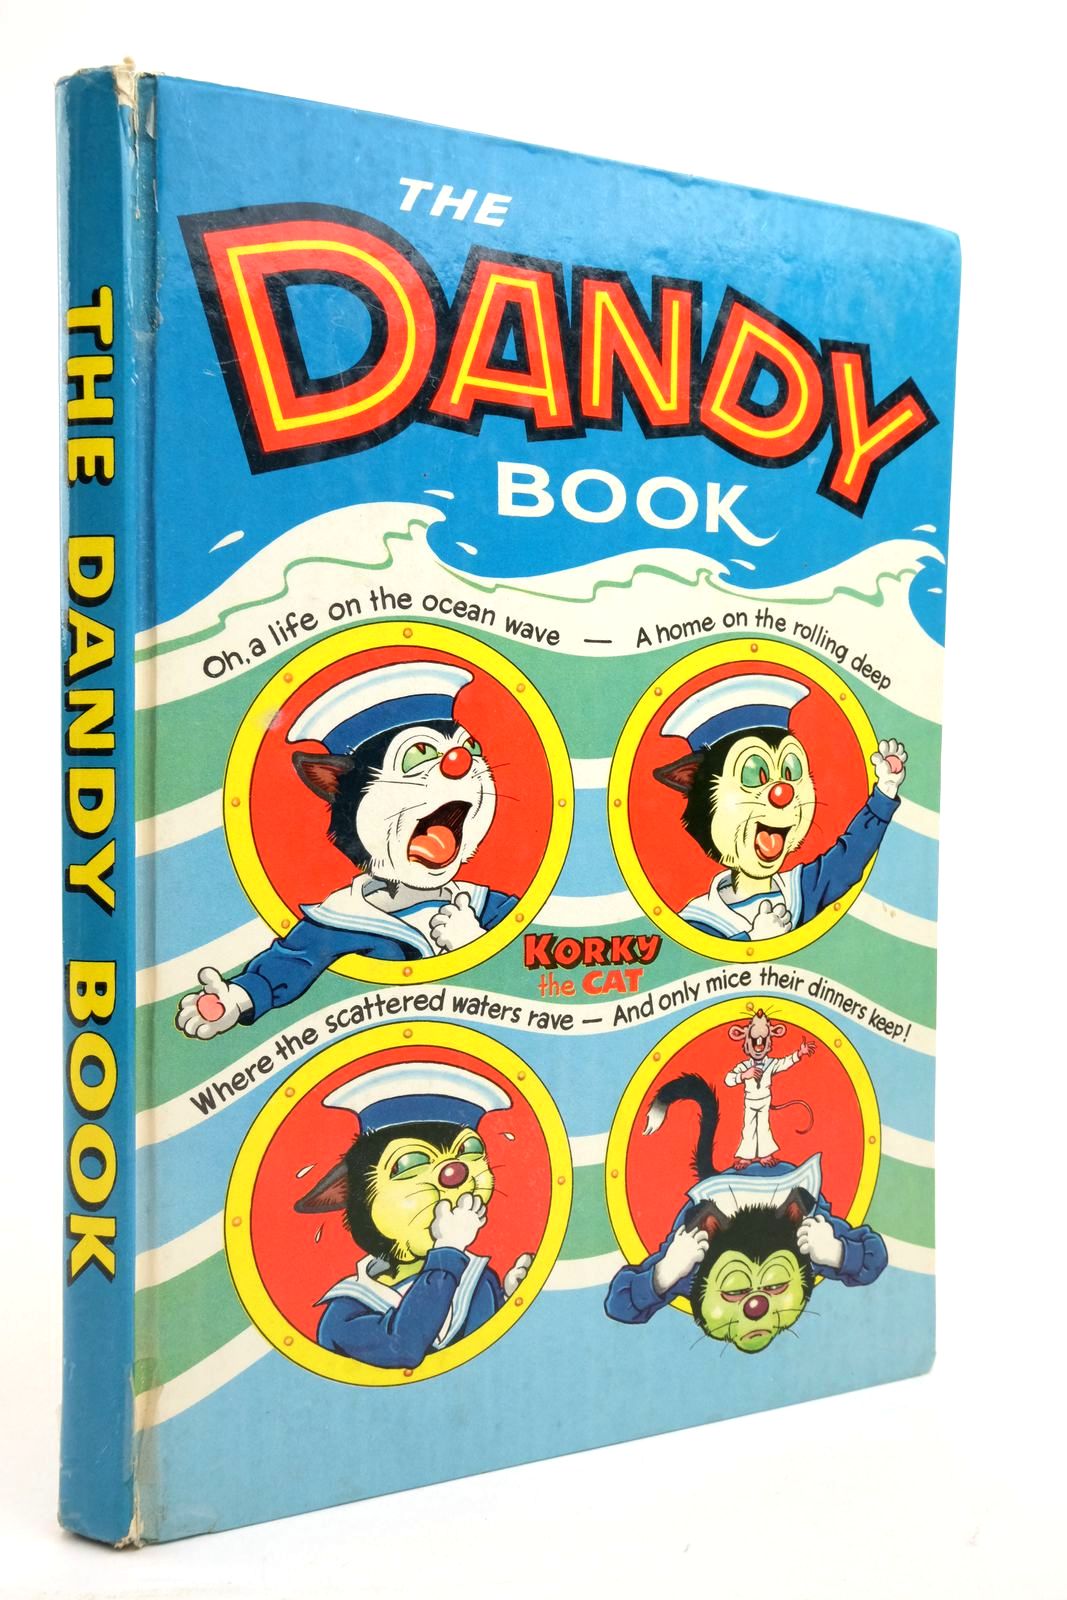 Photo of THE DANDY BOOK 1963 published by D.C. Thomson &amp; Co Ltd. (STOCK CODE: 2137186)  for sale by Stella & Rose's Books